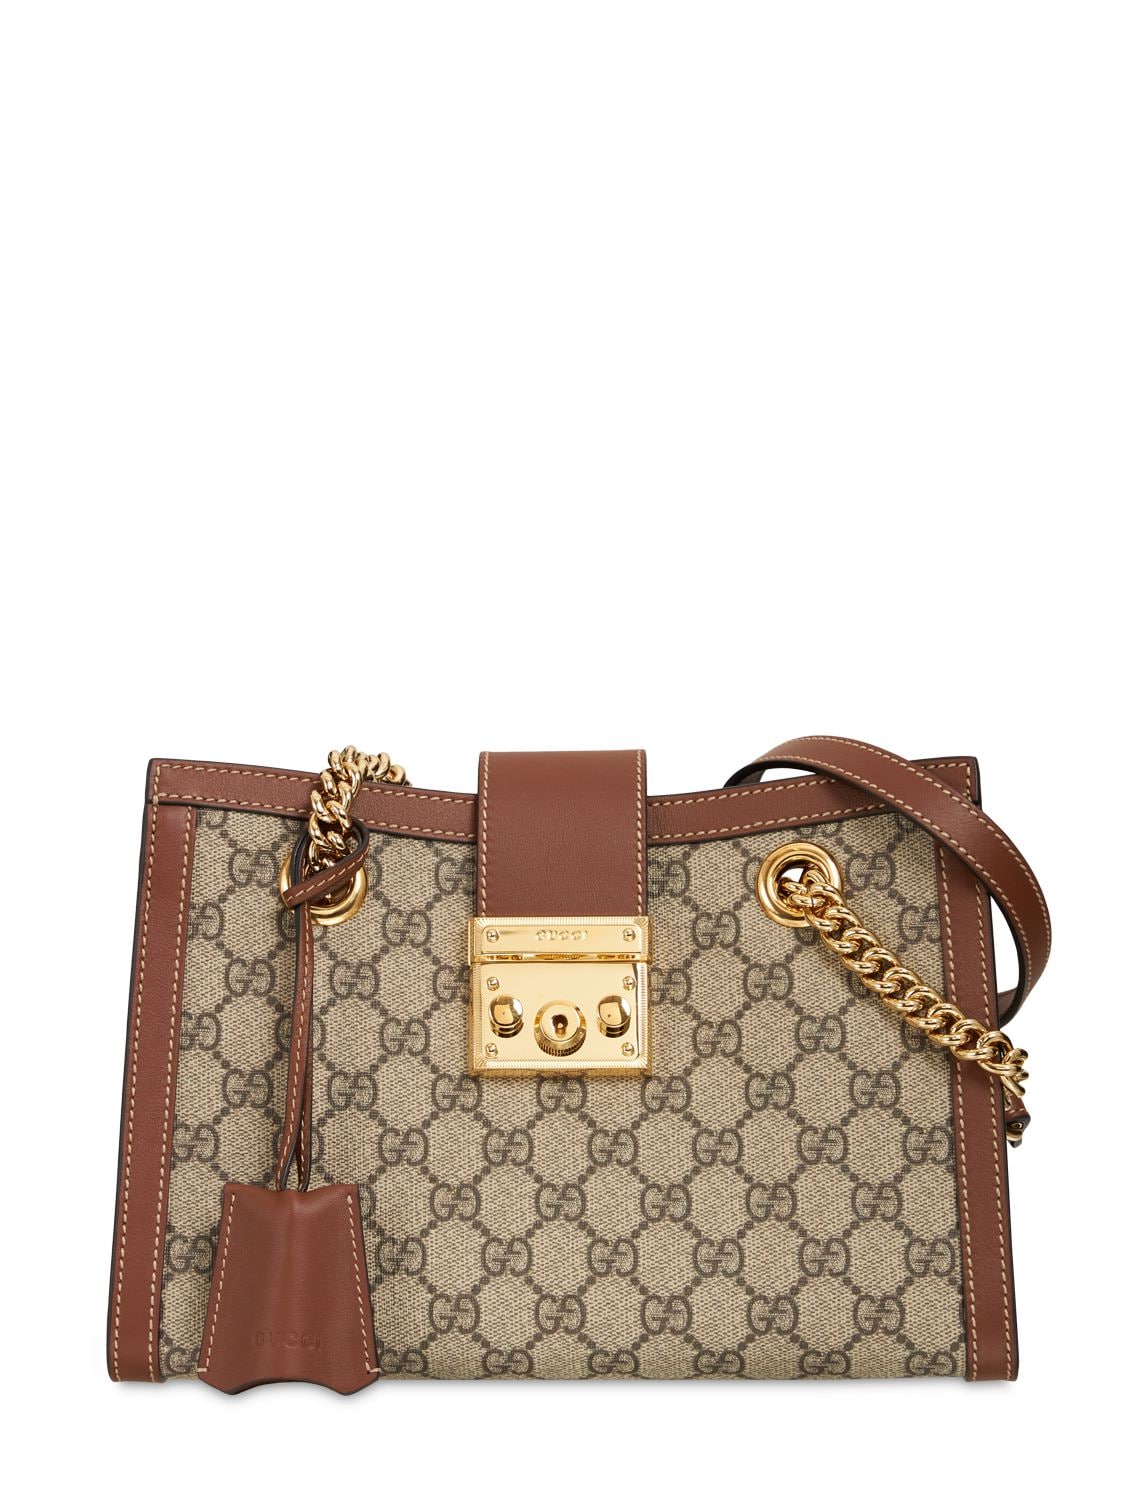 Louis Vuitton Jelly Shopping Bag in Golden Brown Patent Leather